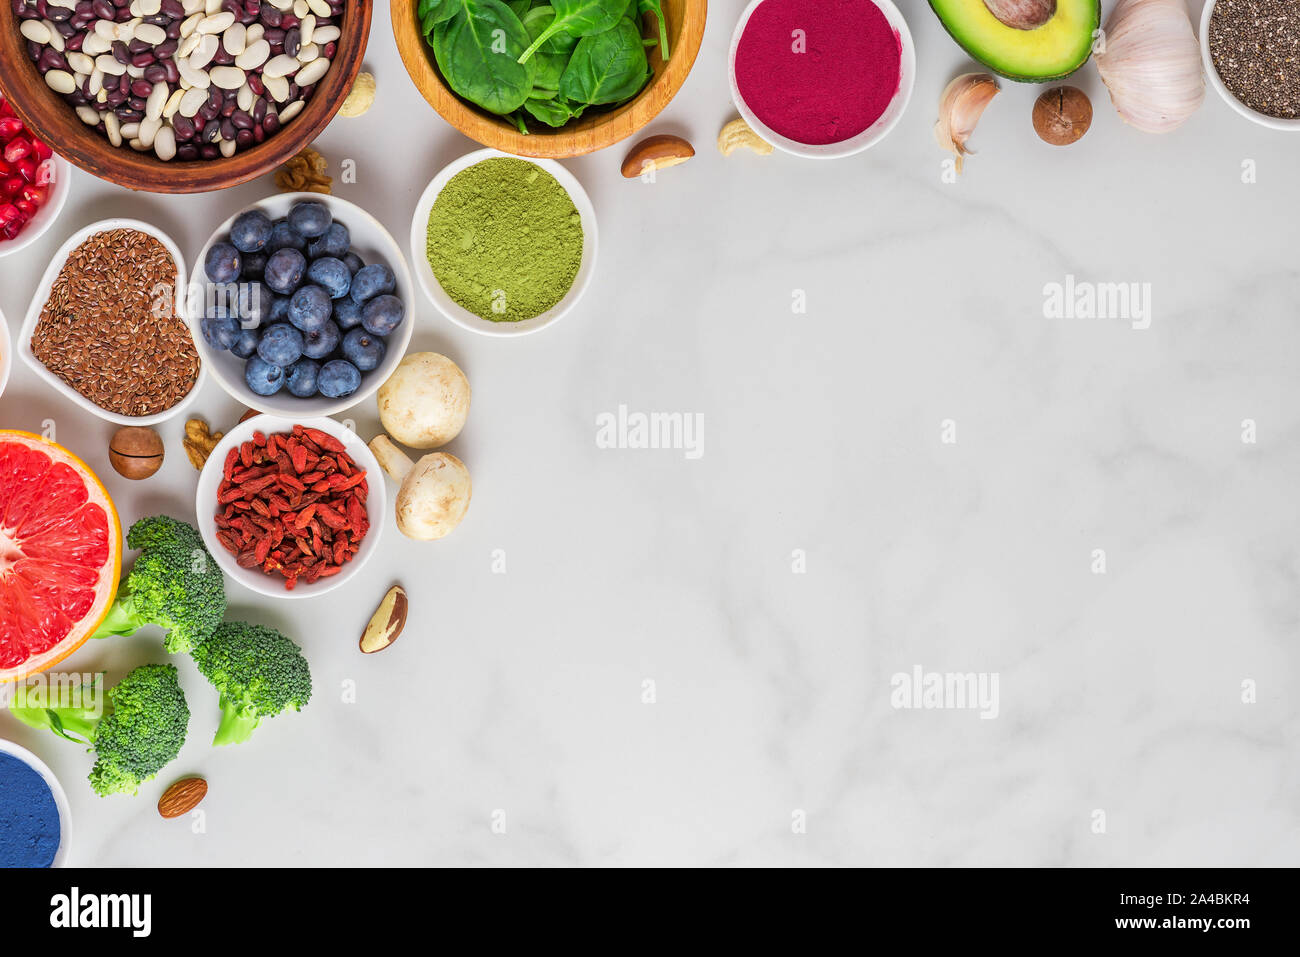 Healthy vegan or vegetarian food on whitemarble table. Vegetables, fruits, nuts and superfood. flat lay. top view with copy space Stock Photo